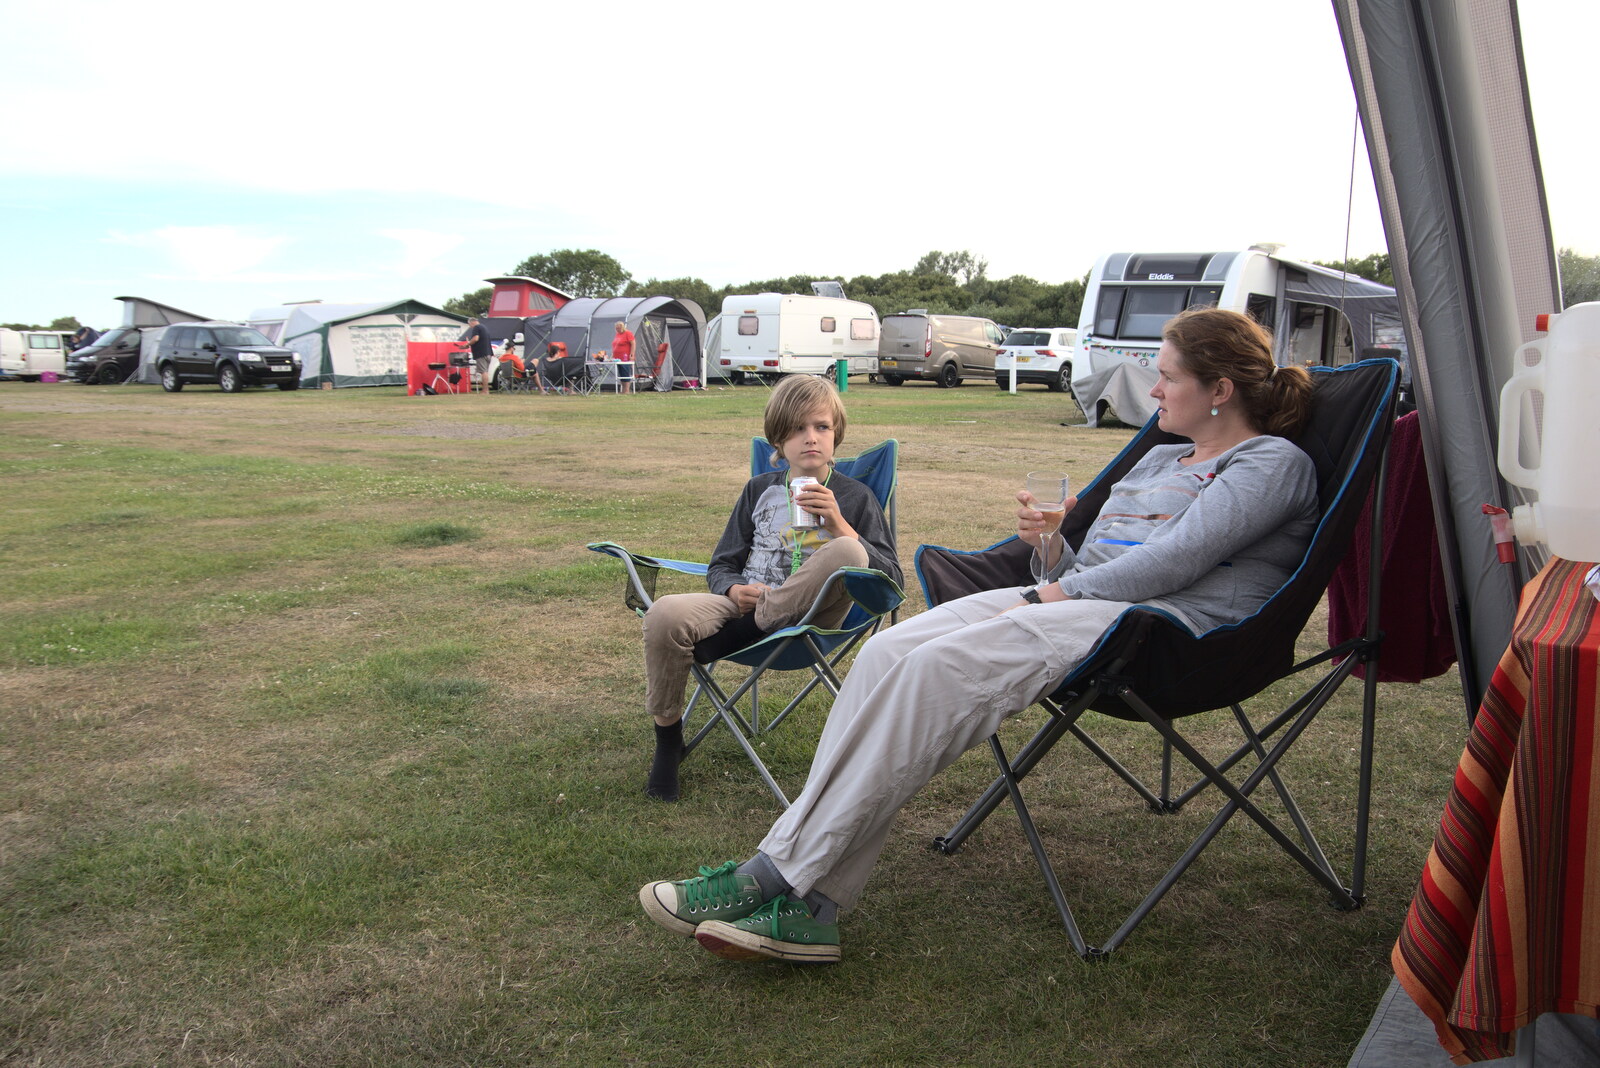 Harry and Isobel hang out by the van from Camping in the Dunes, Waxham Sands, Norfolk - 9th July 2022